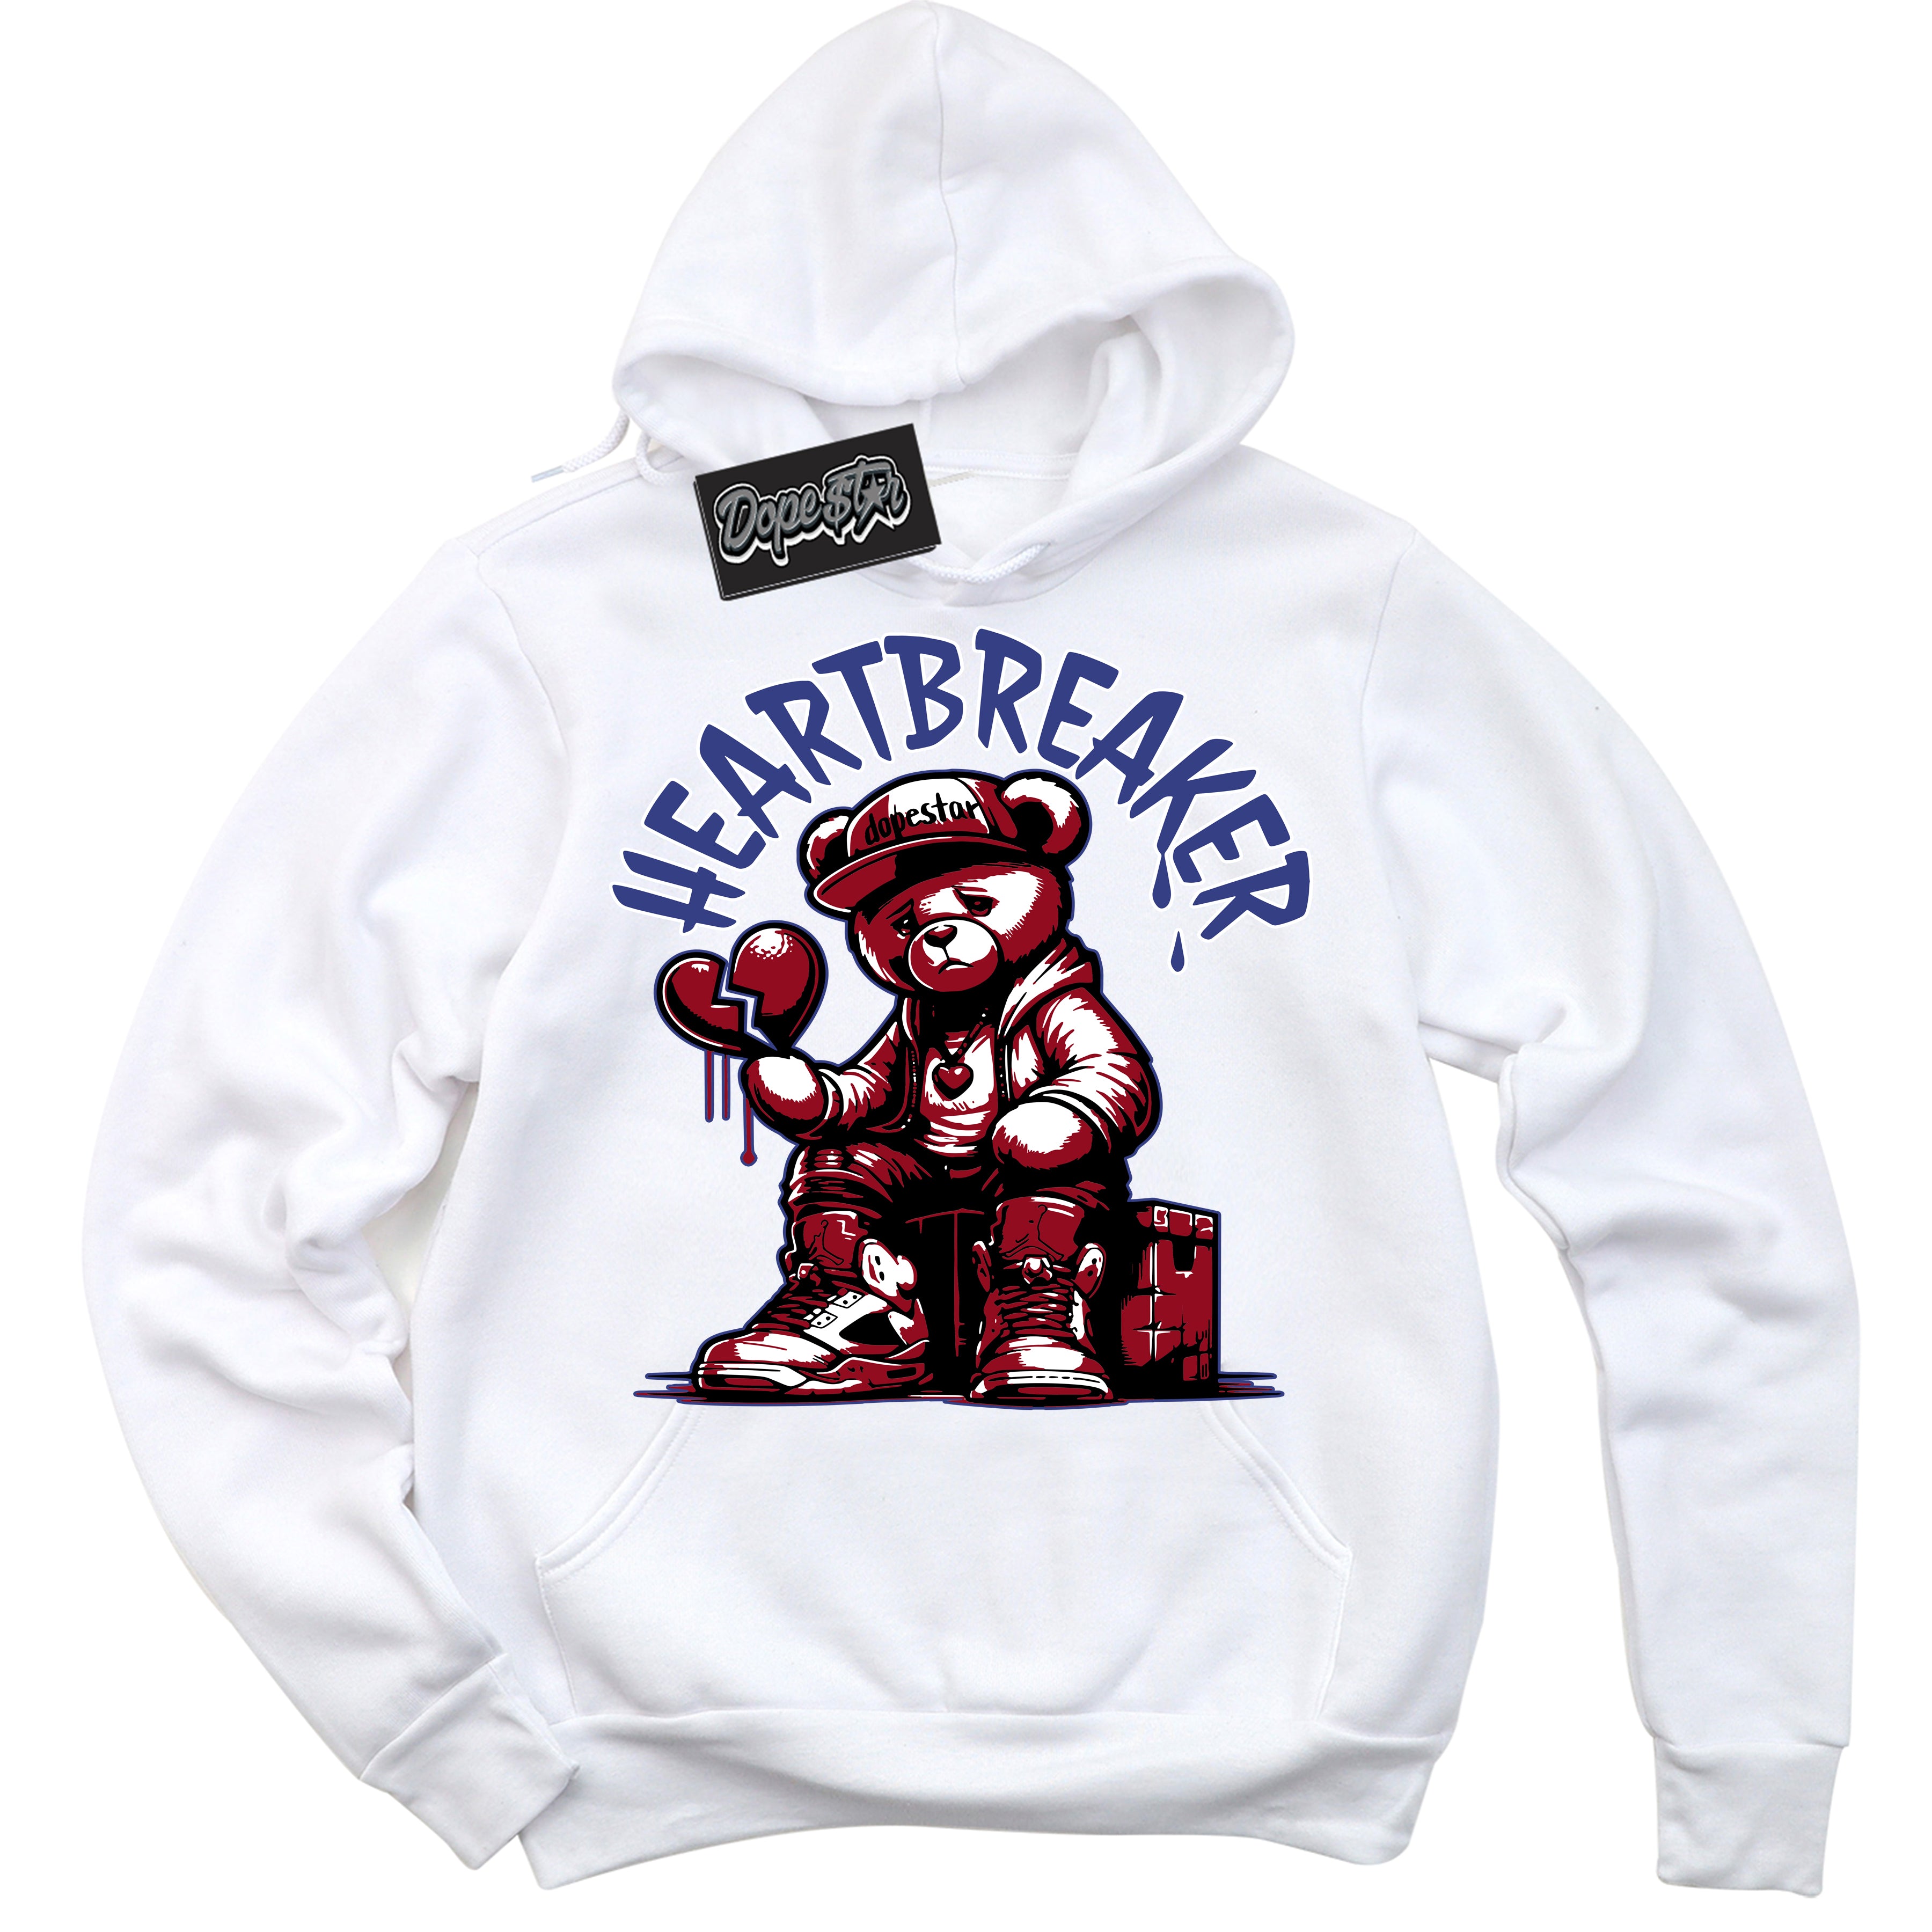 Cool White Hoodie with “ Heartbreaker Bear ”  design that Perfectly Matches Playoffs 8s Sneakers.